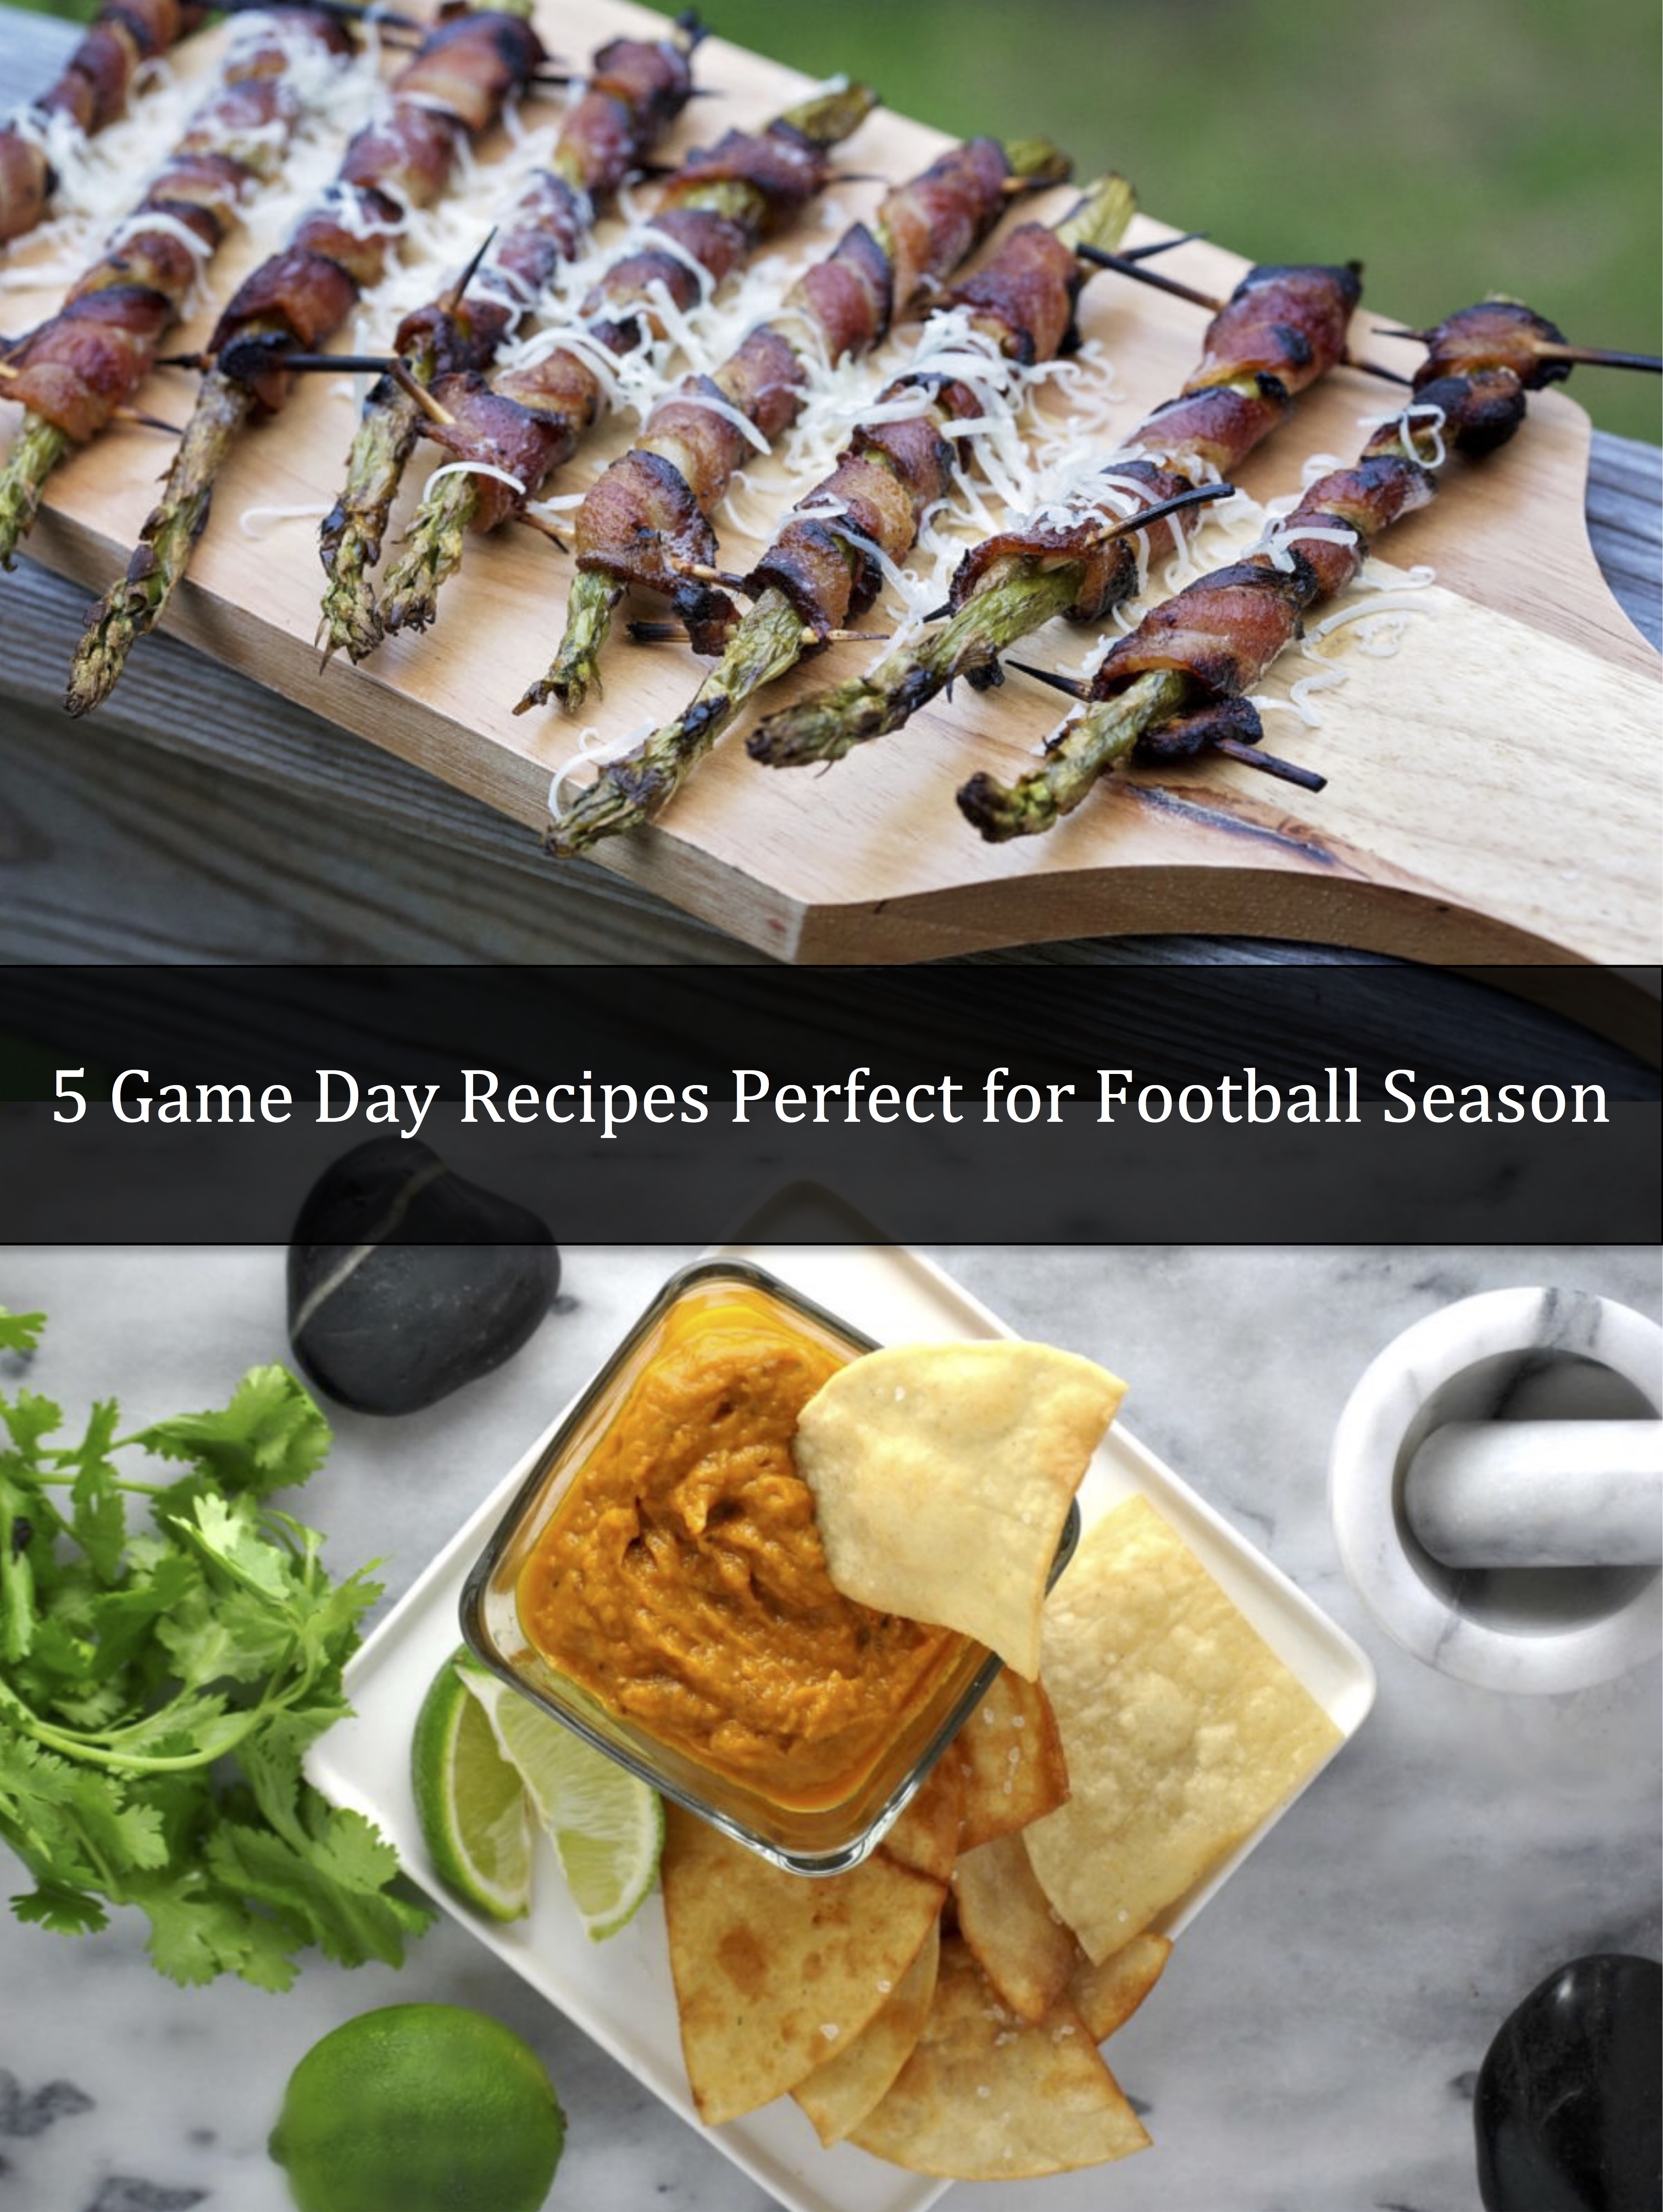 5 Game Day Recipes Perfect for Football Season